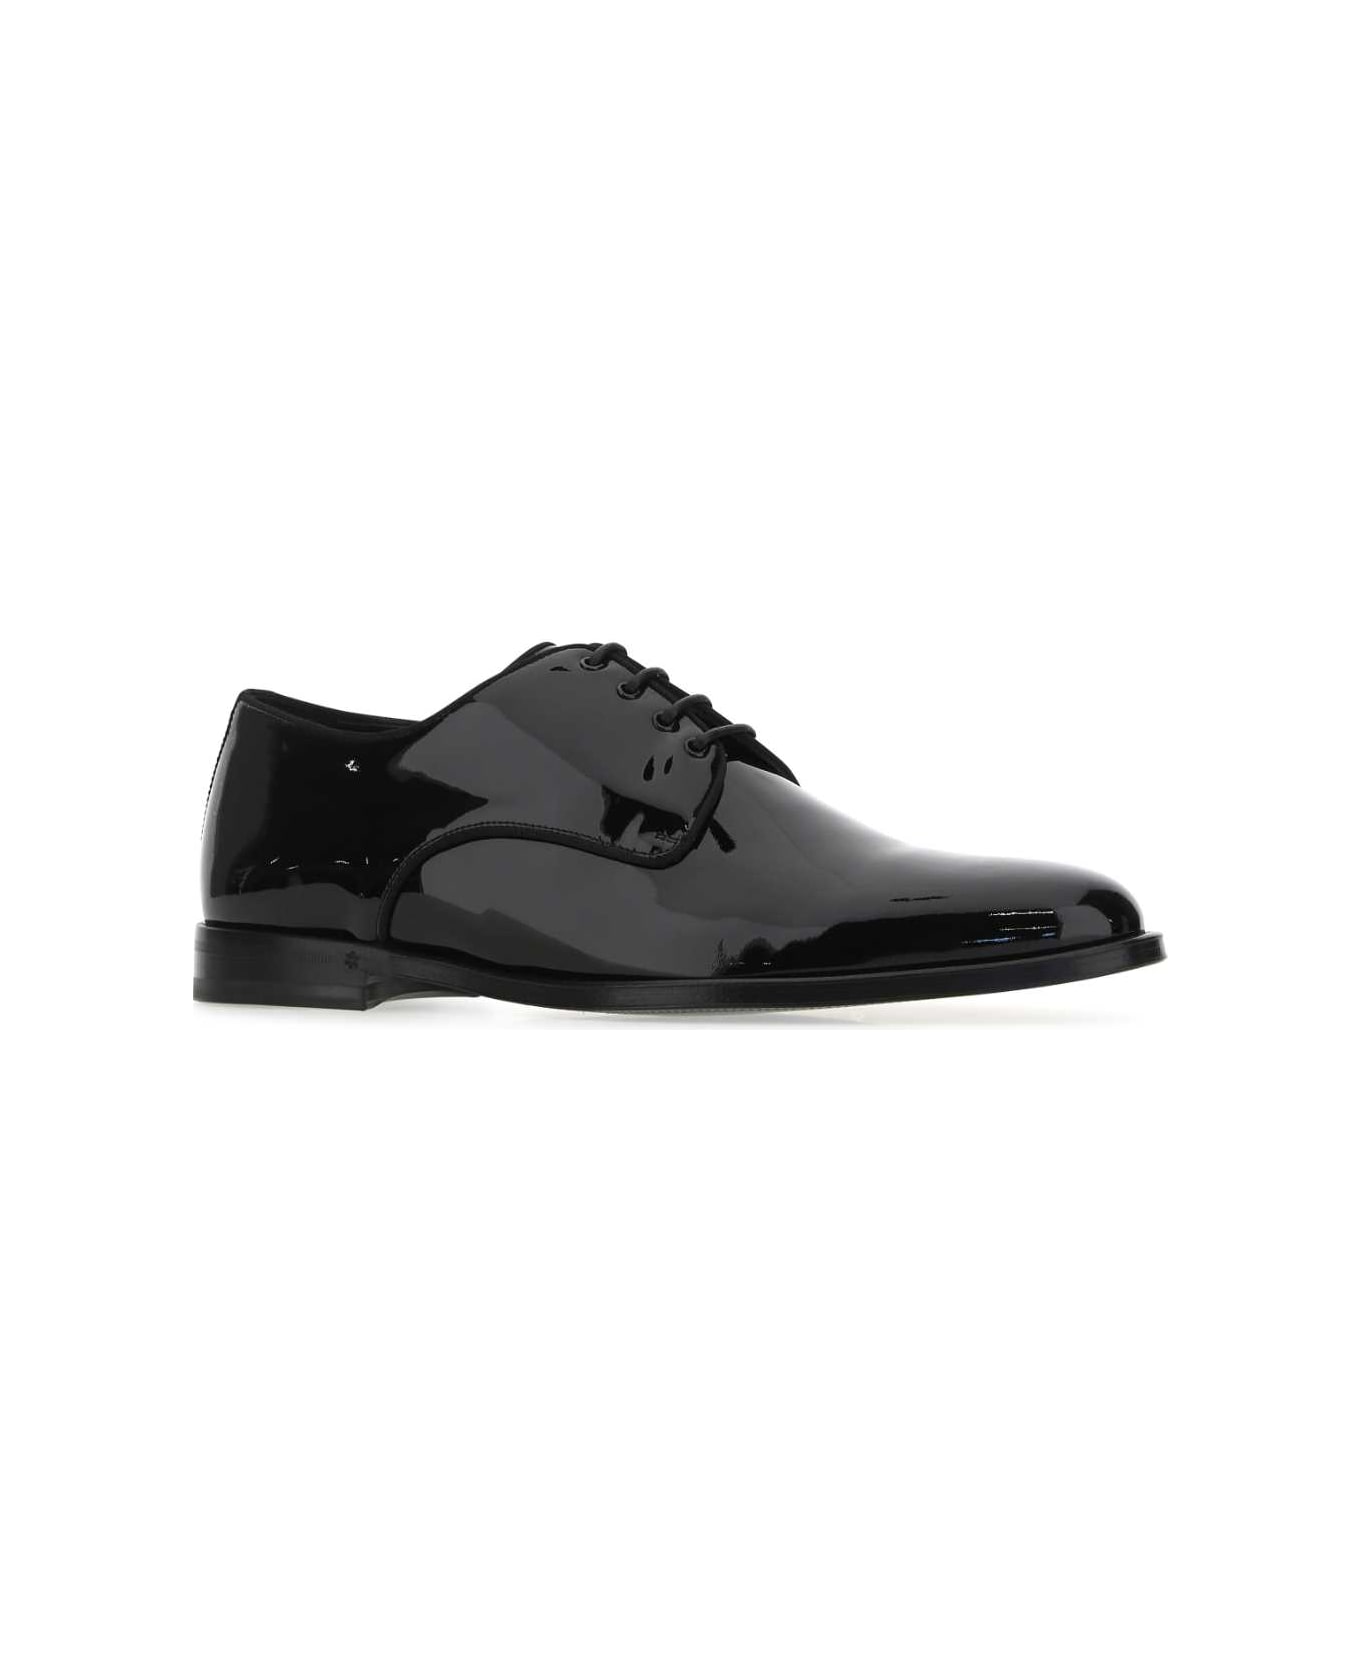 Dolce & Gabbana Black Leather Lace-up Shoes - 80999 ローファー＆デッキシューズ